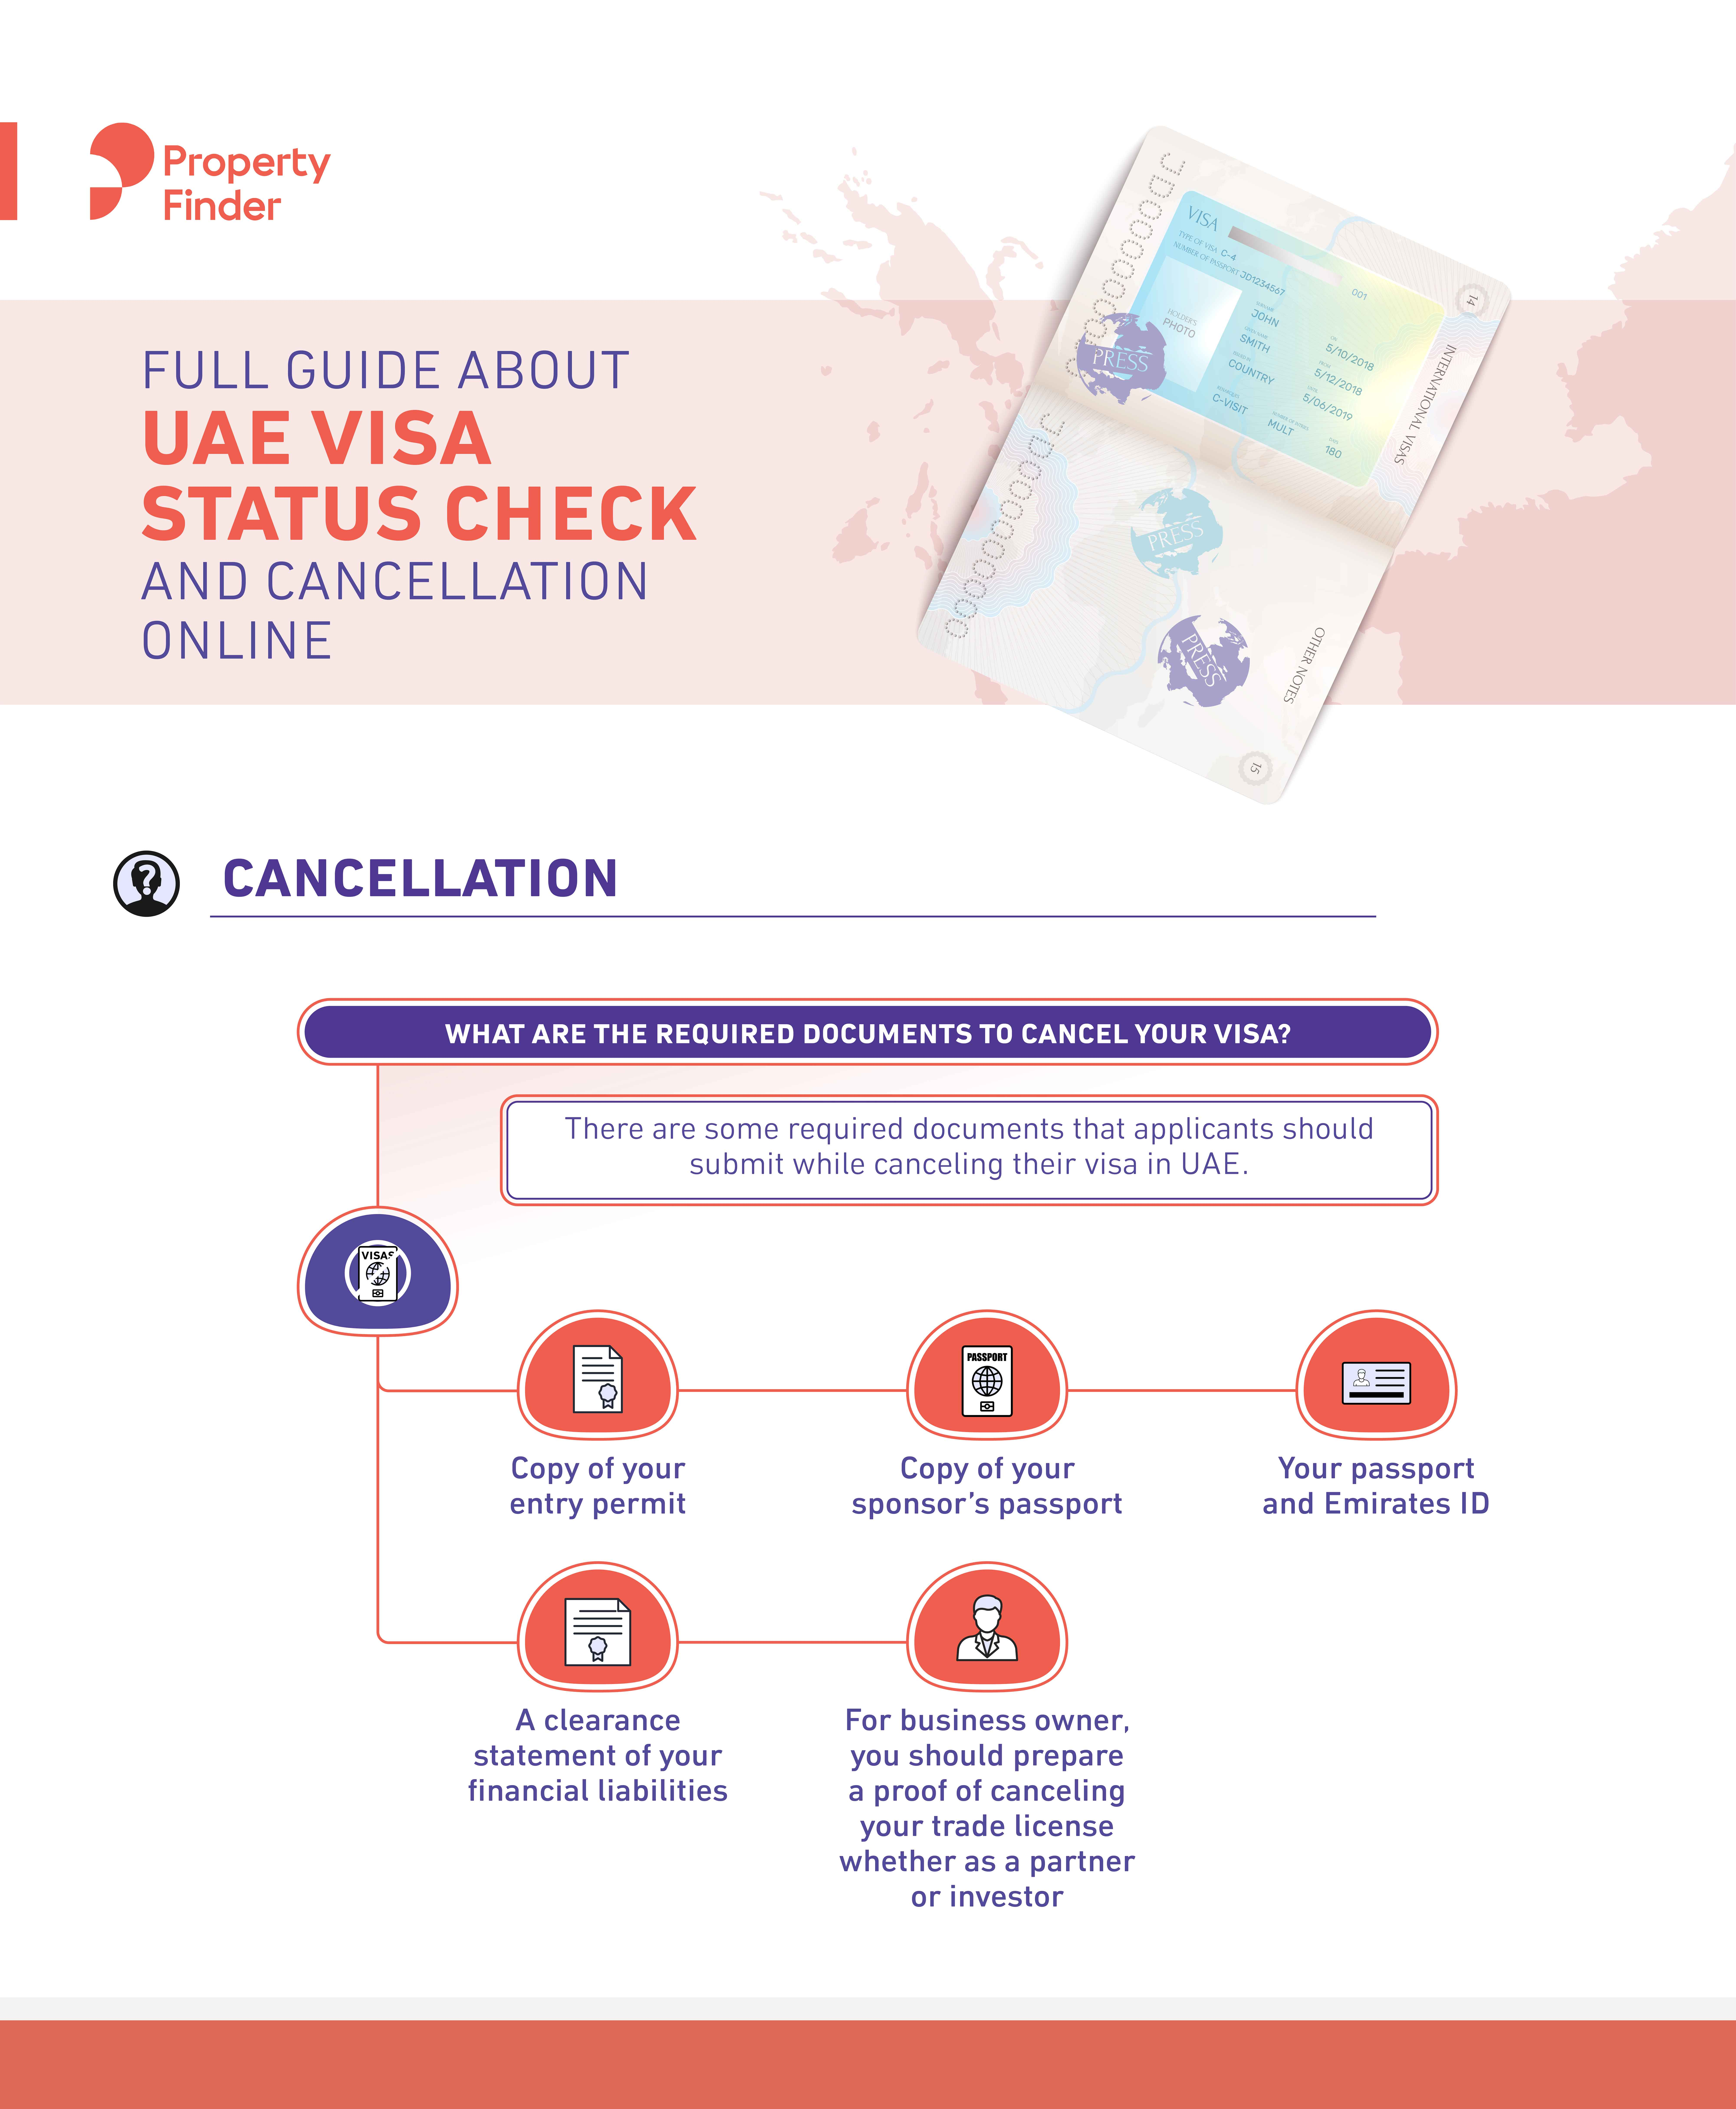  What Should You Do Before Cancelling Your Visa?